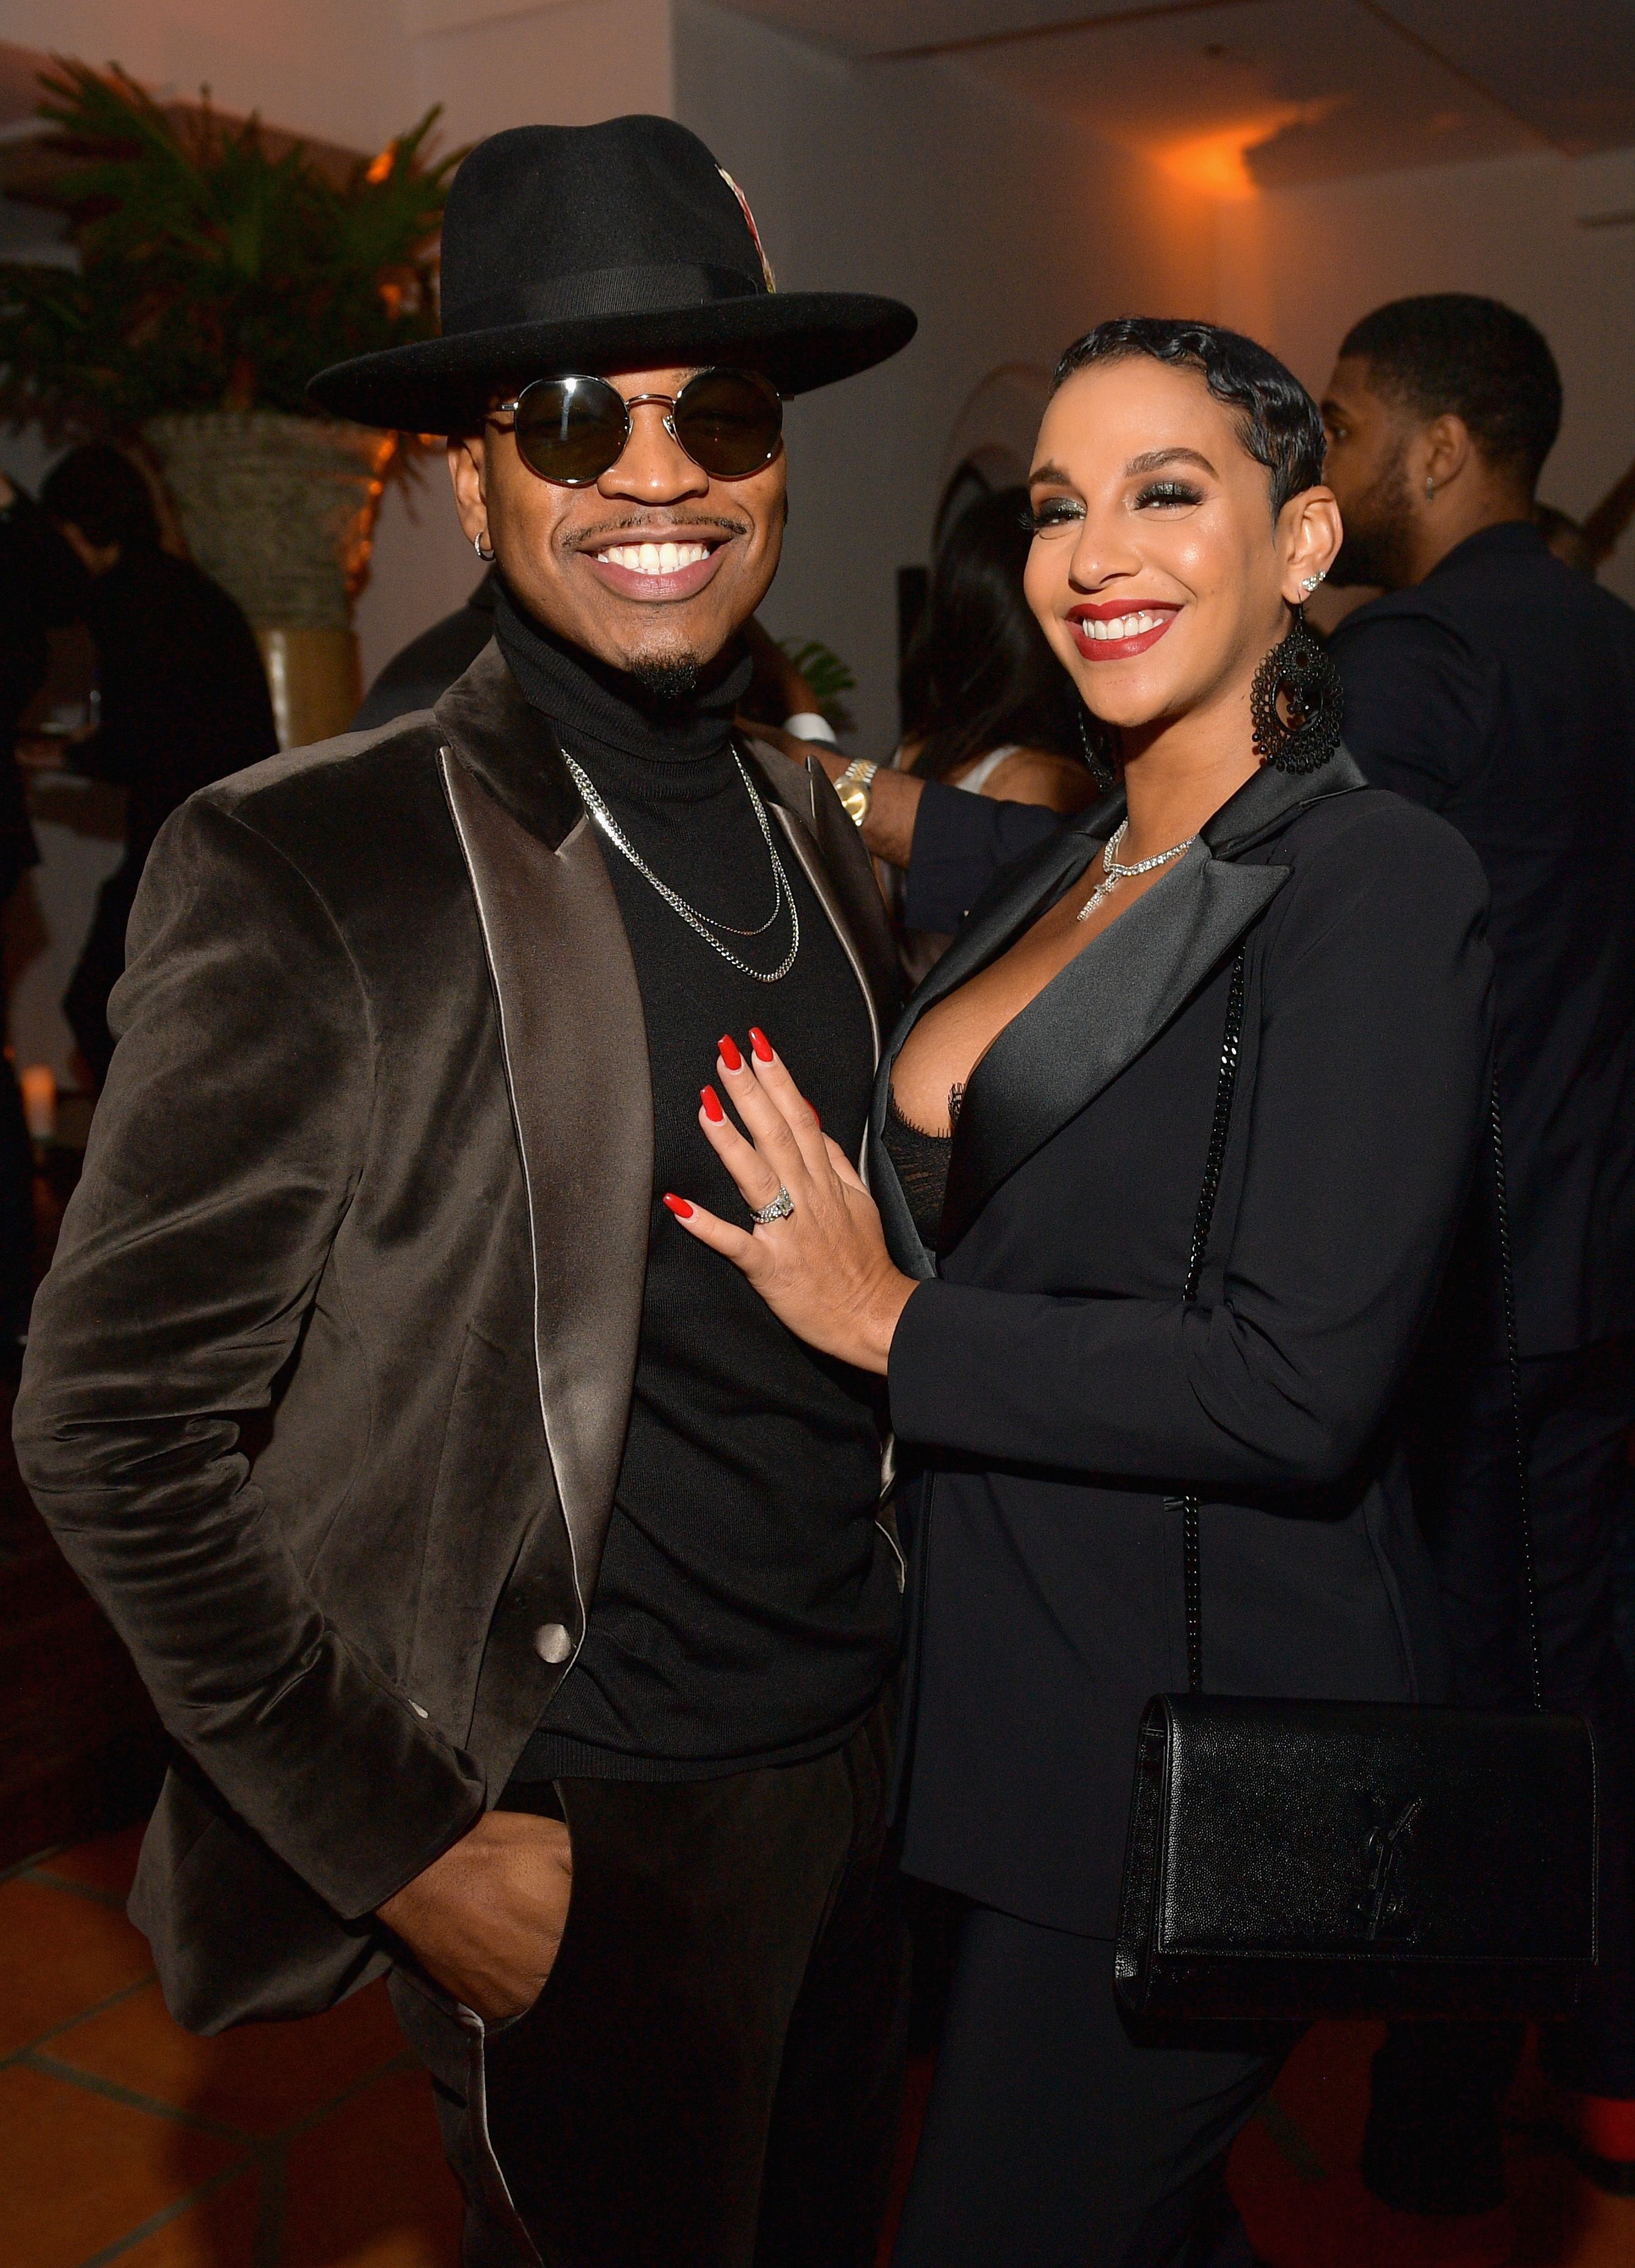 Ne-Yo and Crystal Renay Smith at the 2018 GQ Men of the Year Party on December 6, 2018 in Beverly Hills, California. | Photo: Getty Images